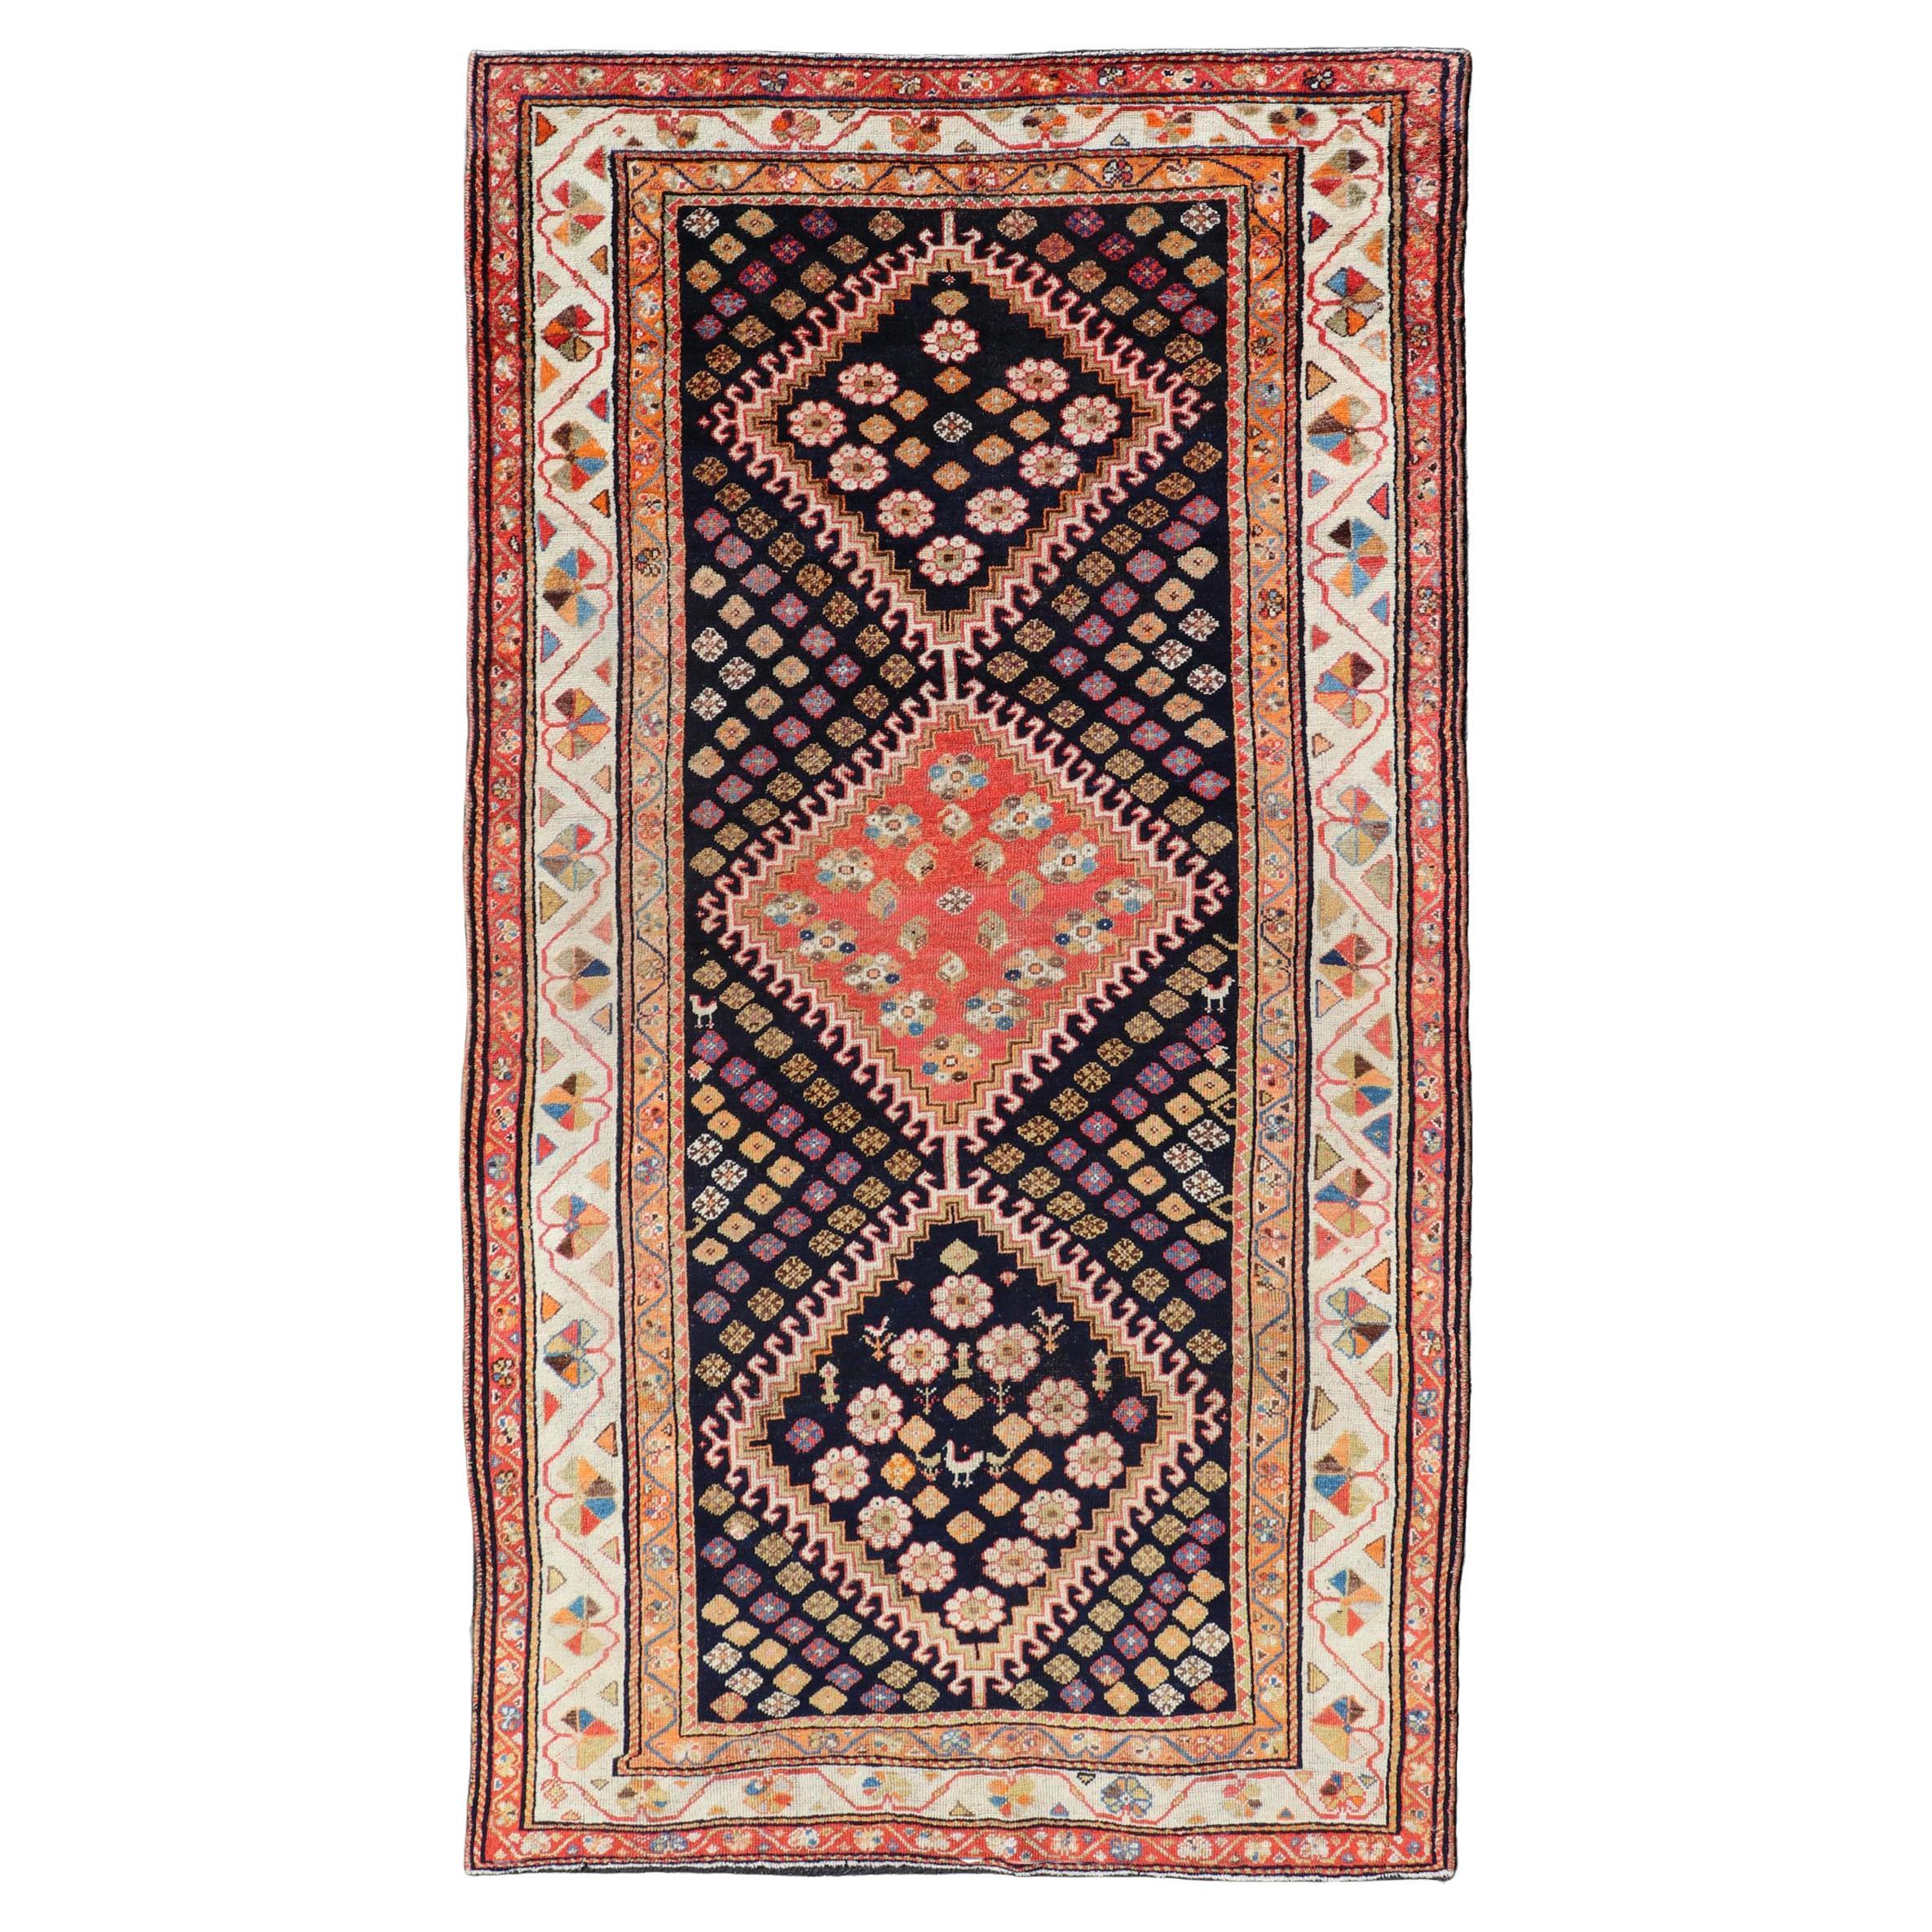 Antique Persian Tribal Shiraz in Wool with Tribal Medallion Design